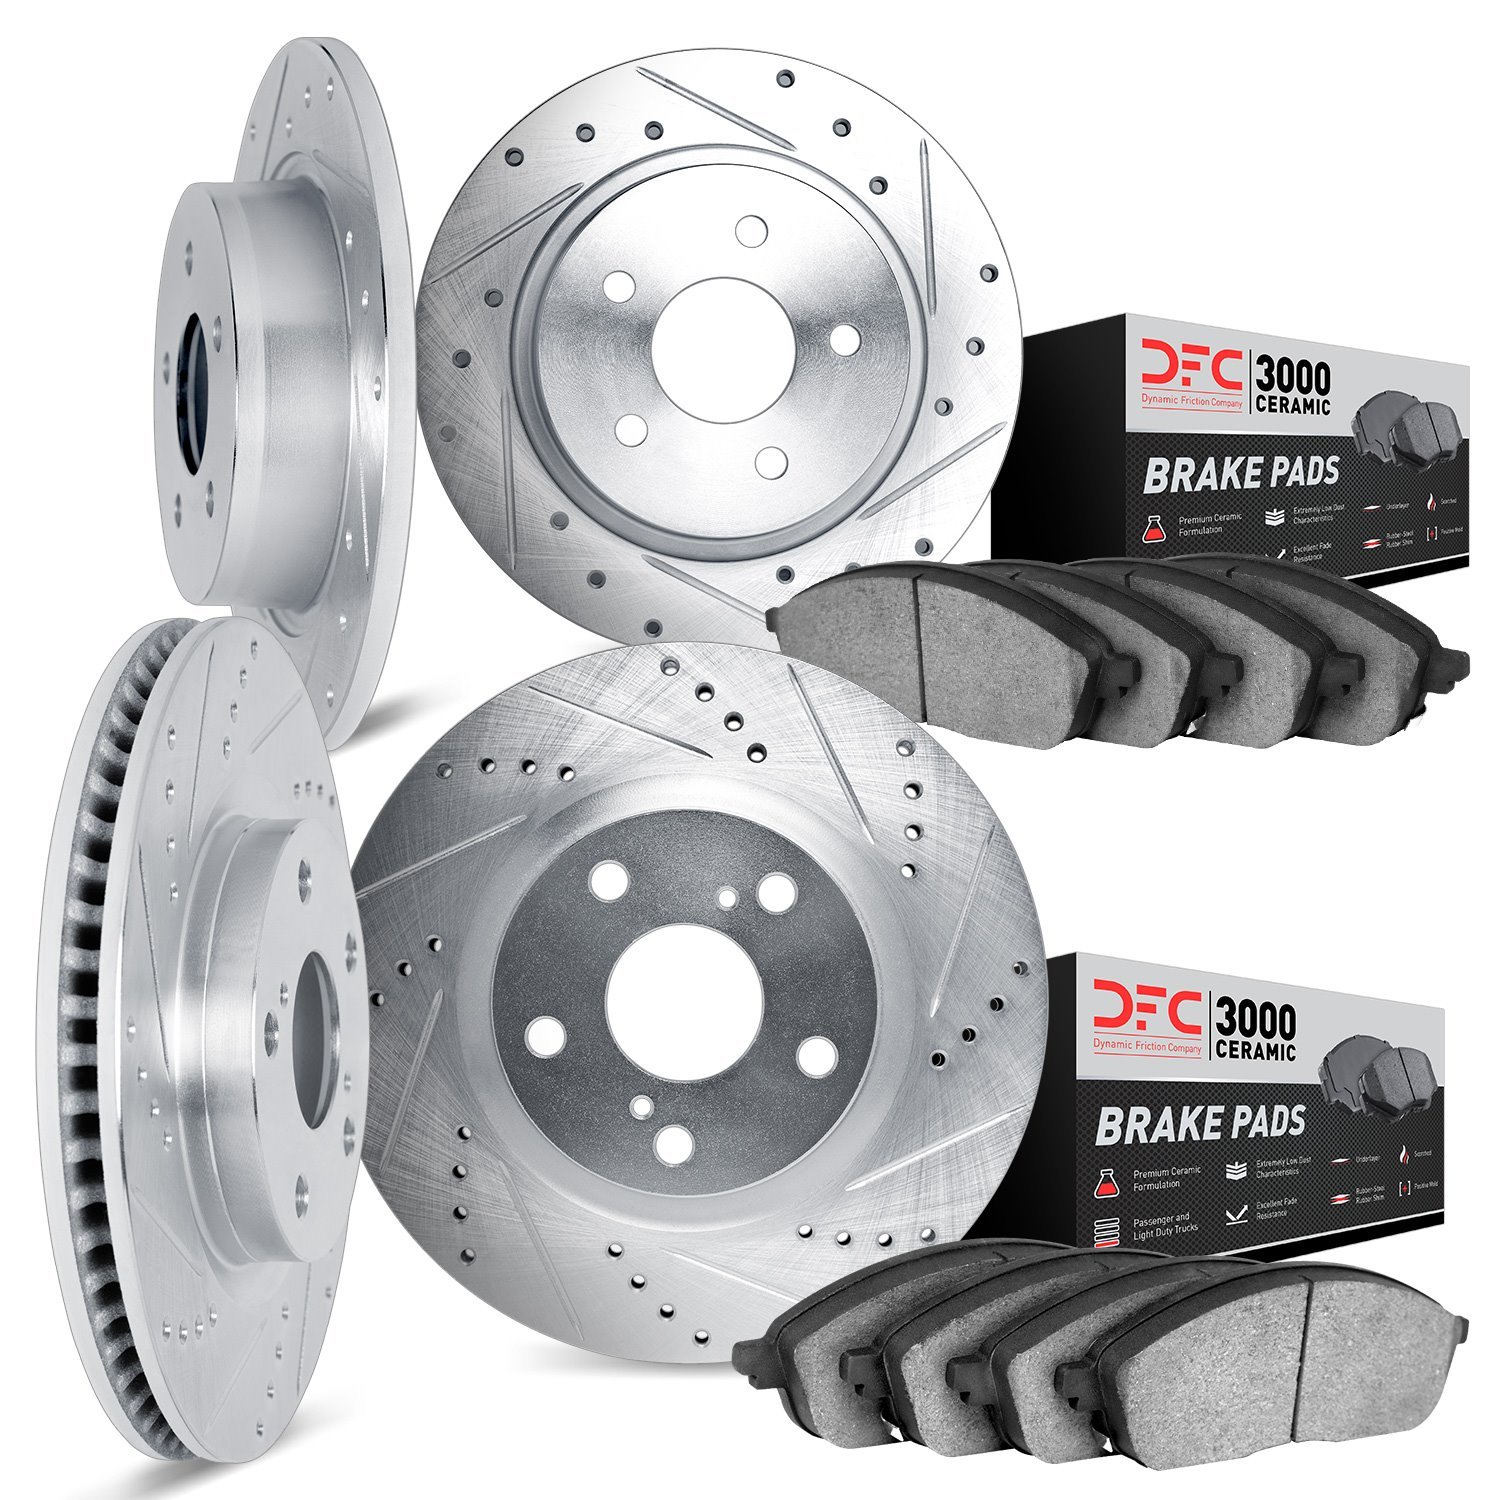 7304-80037 Drilled/Slotted Brake Rotor with 3000-Series Ceramic Brake Pads Kit [Silver], 2016-2018 Ford/Lincoln/Mercury/Mazda, P